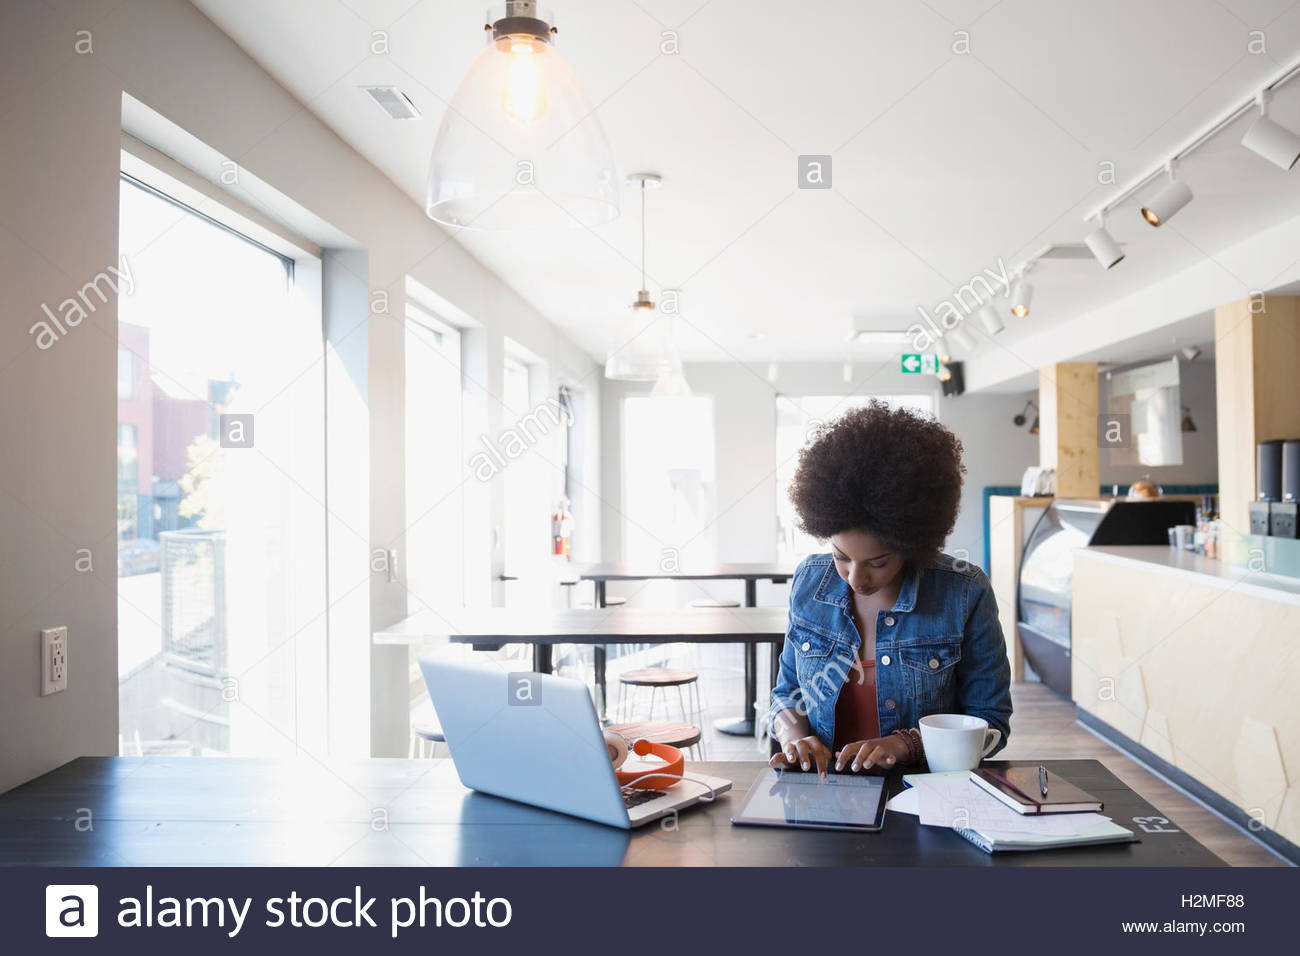 Woman working at digital tablet in cafe Stock Photo